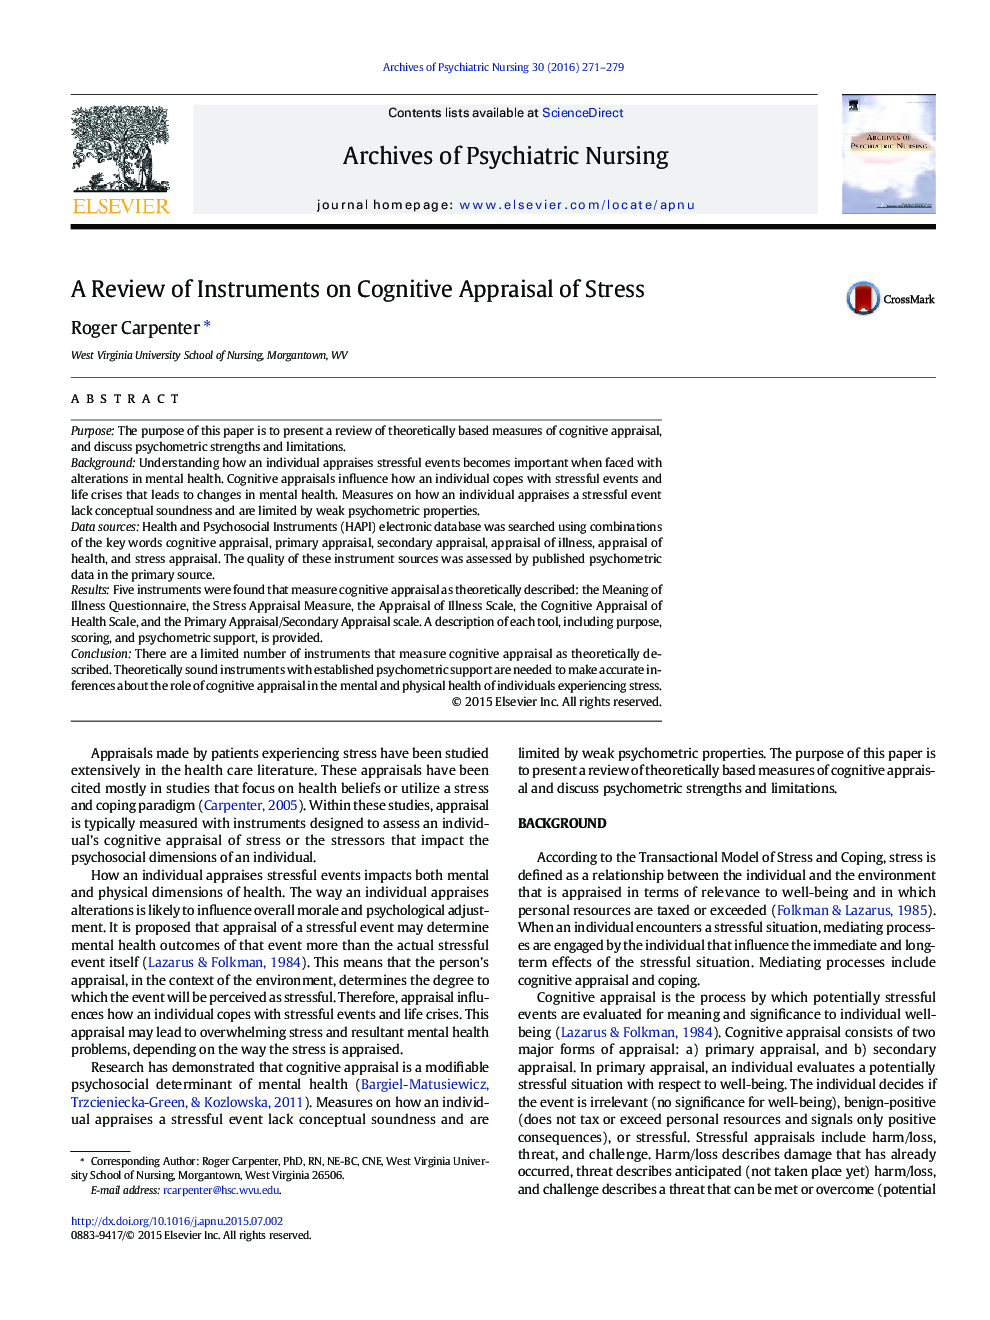 A Review of Instruments on Cognitive Appraisal of Stress